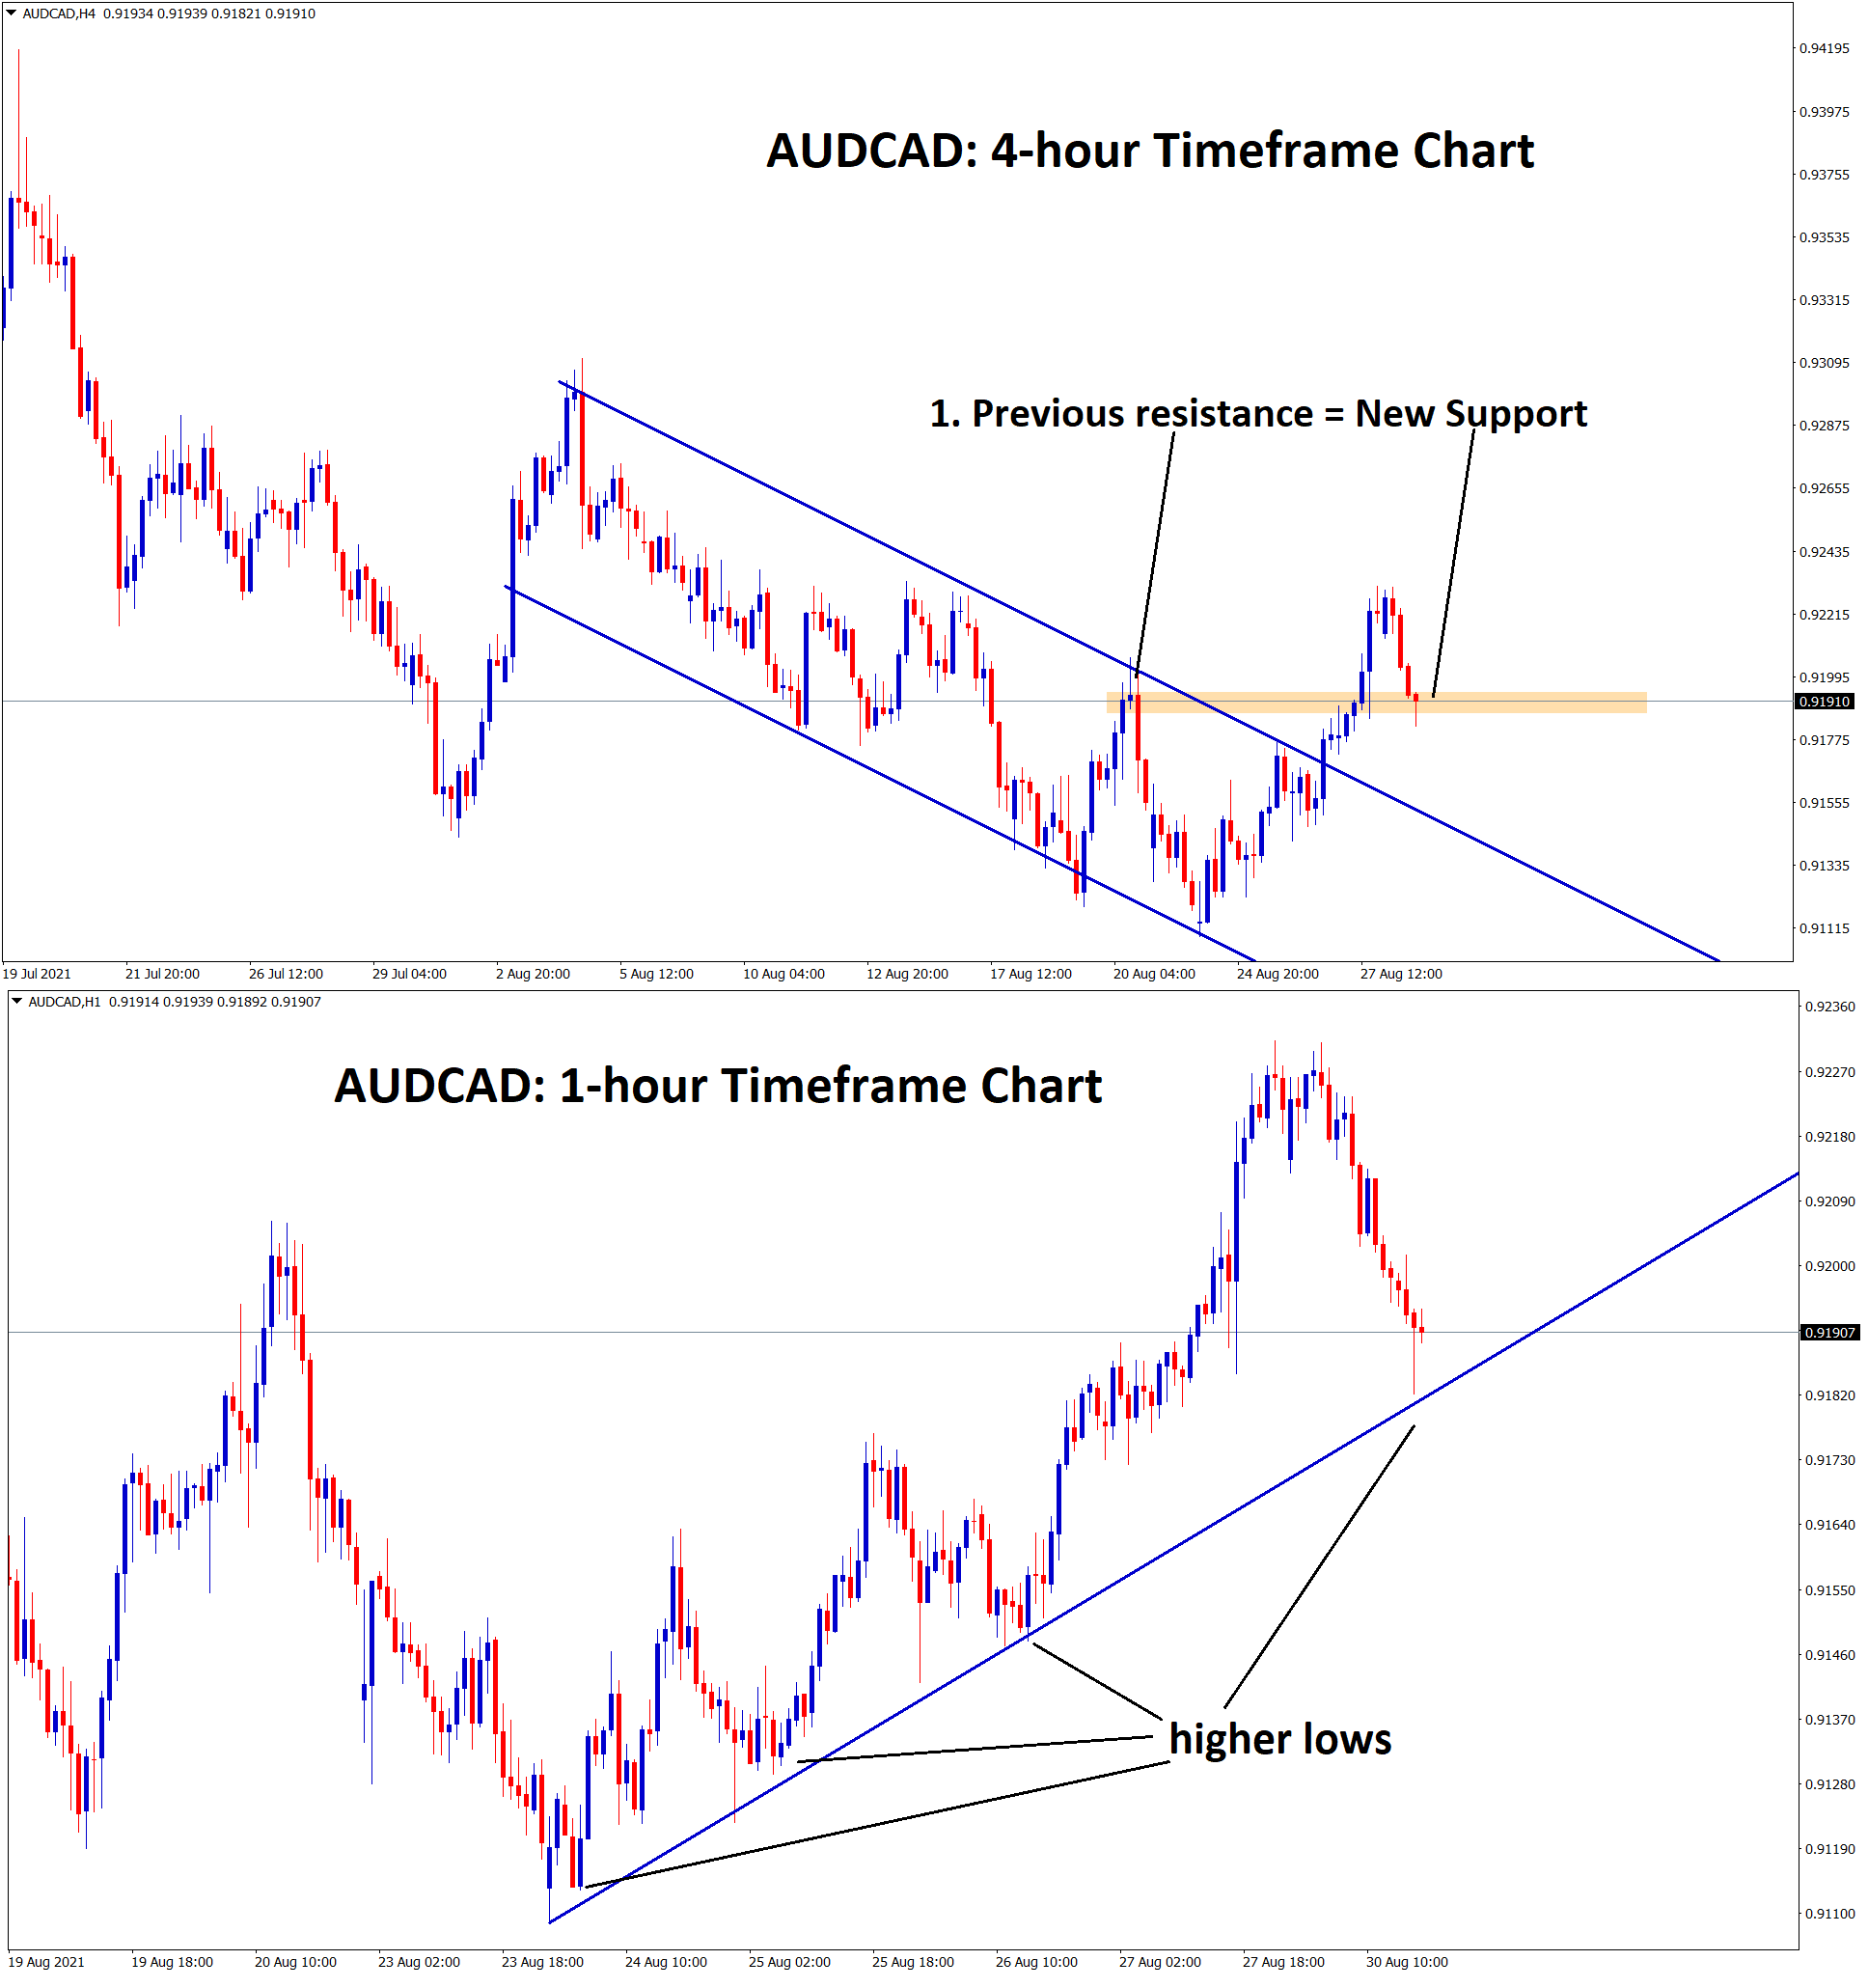 AUDCAD has reached the low level in both h4 and h1 timeframes